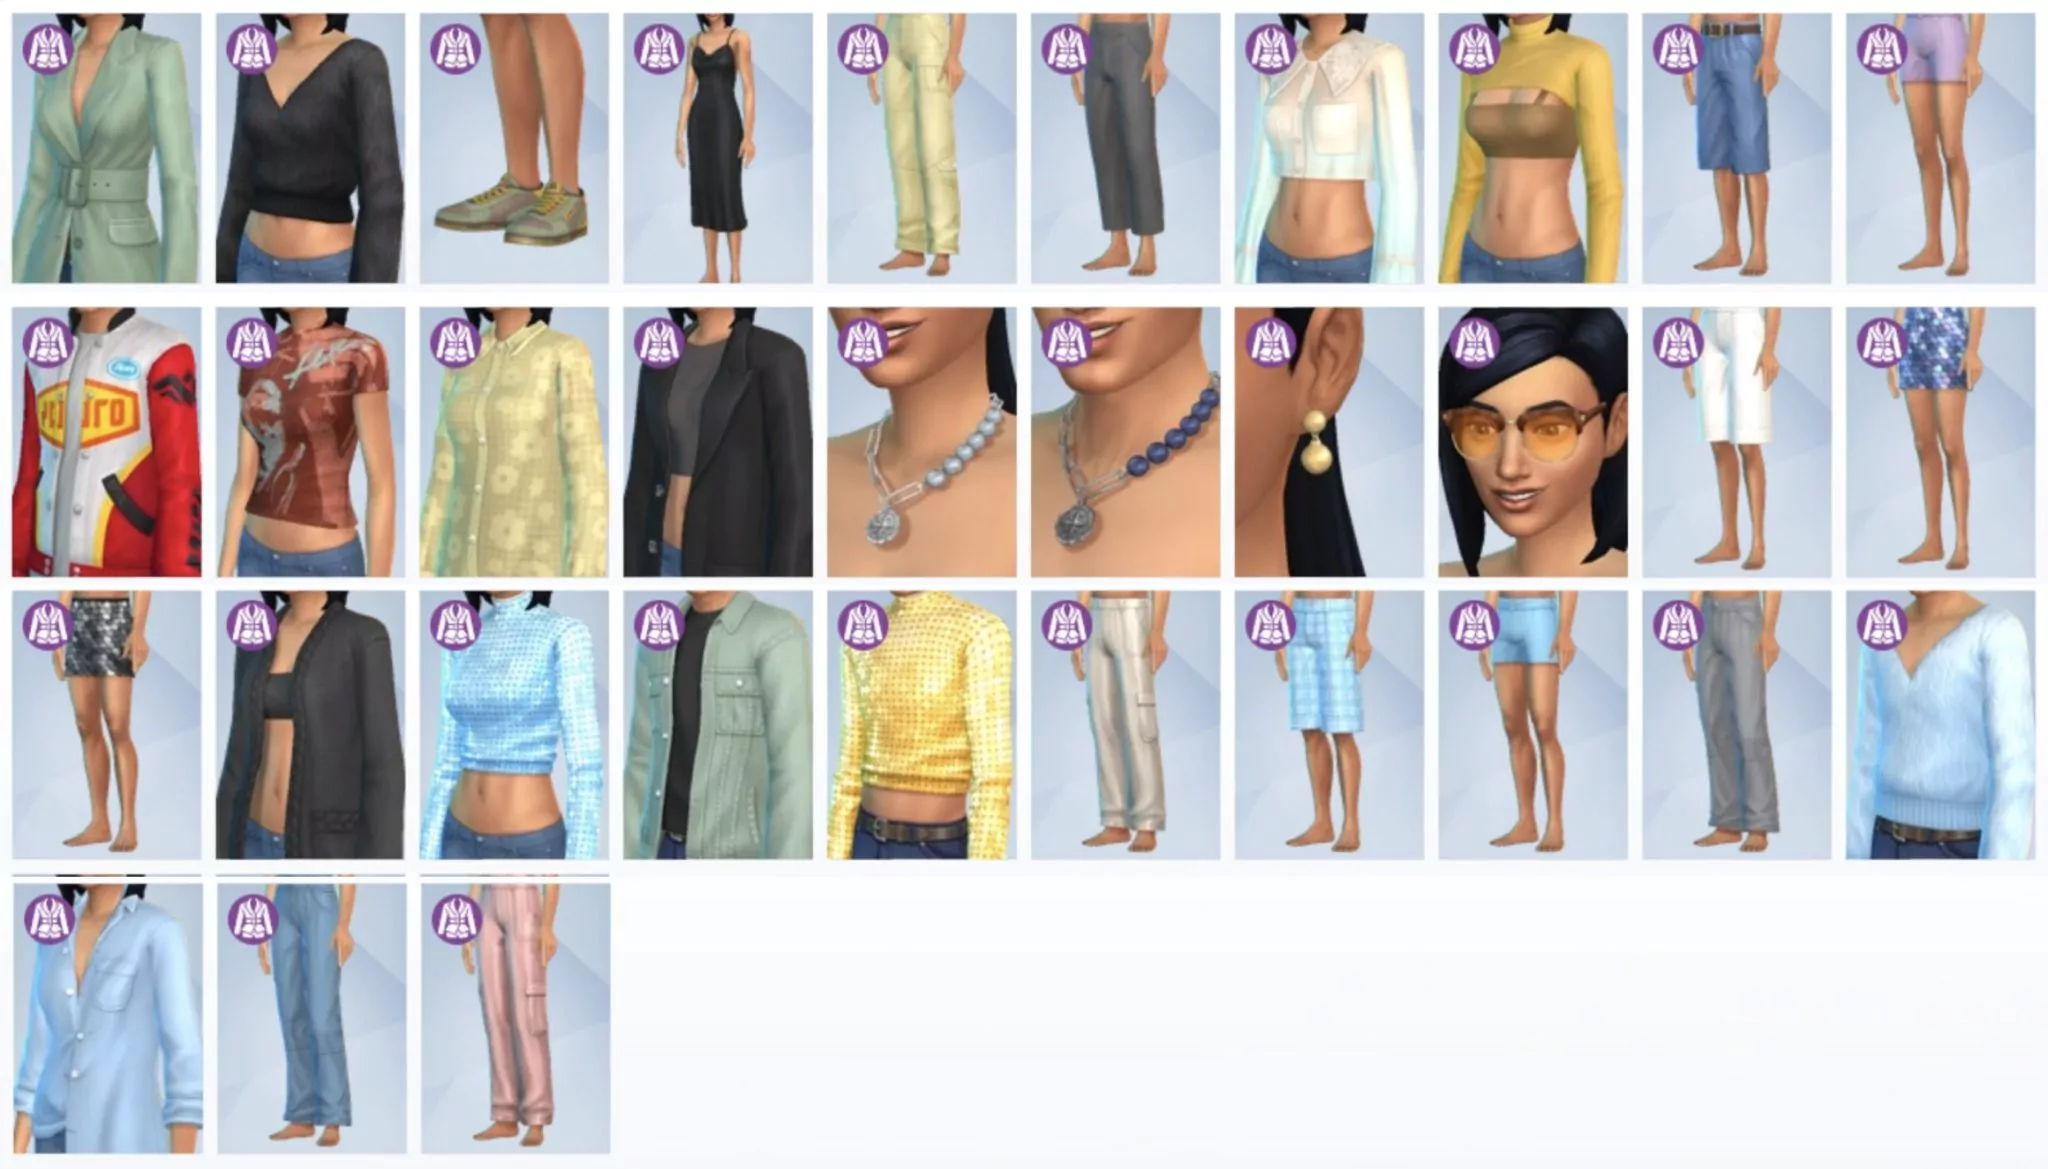 The Sims 4 Moonlight Chic Kit - CAS Items